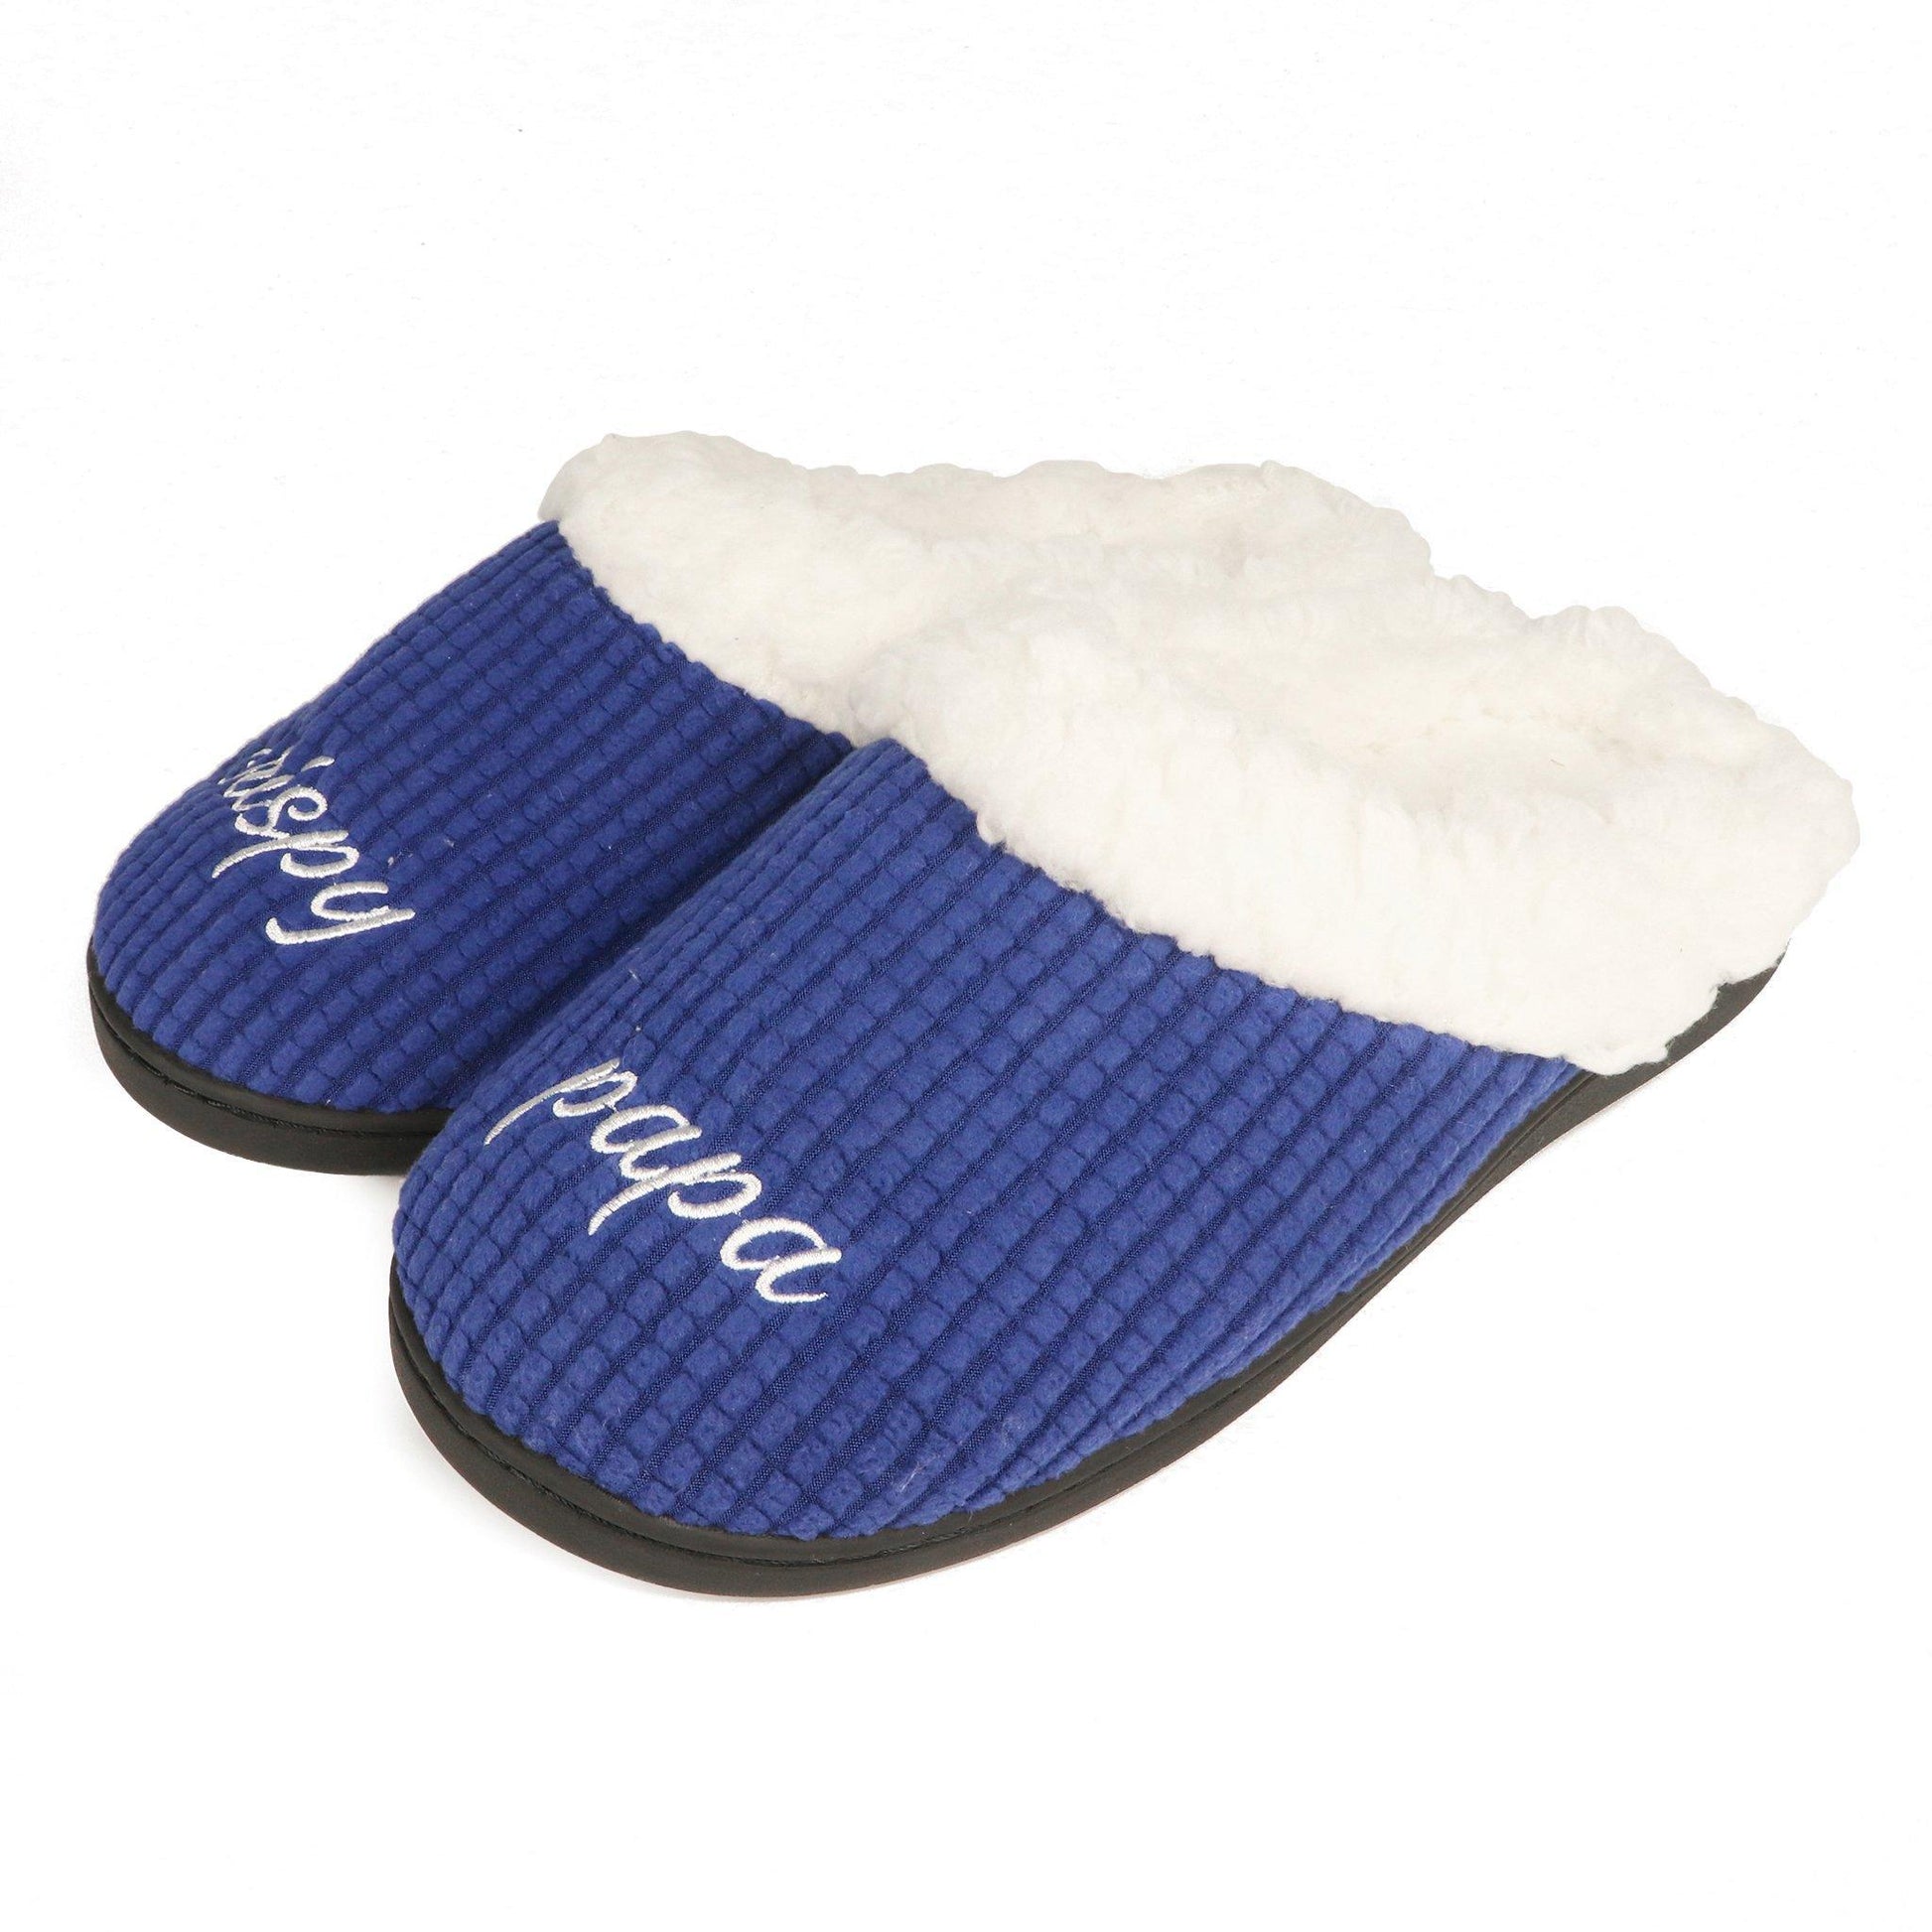 blue bud light slippers that say crispy on the right slipper and papa on the left